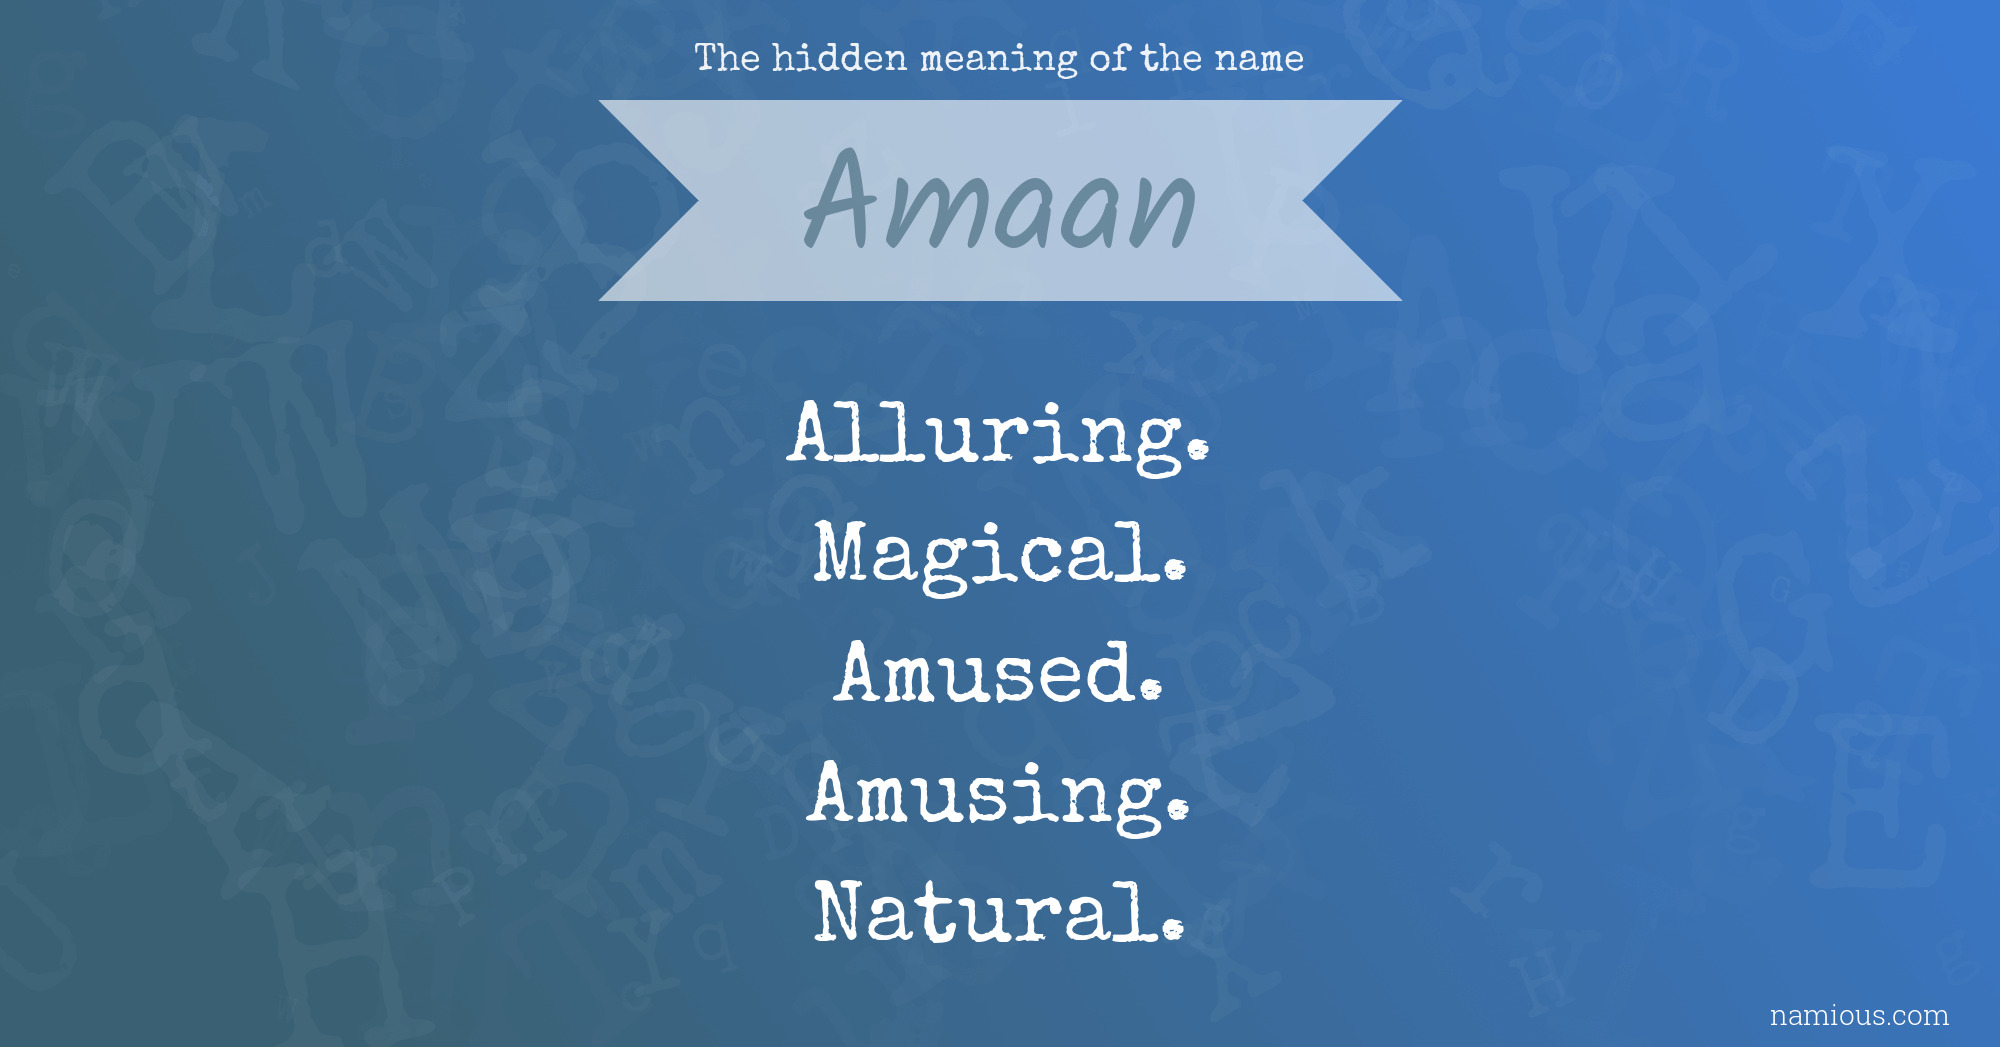 The hidden meaning of the name Amaan